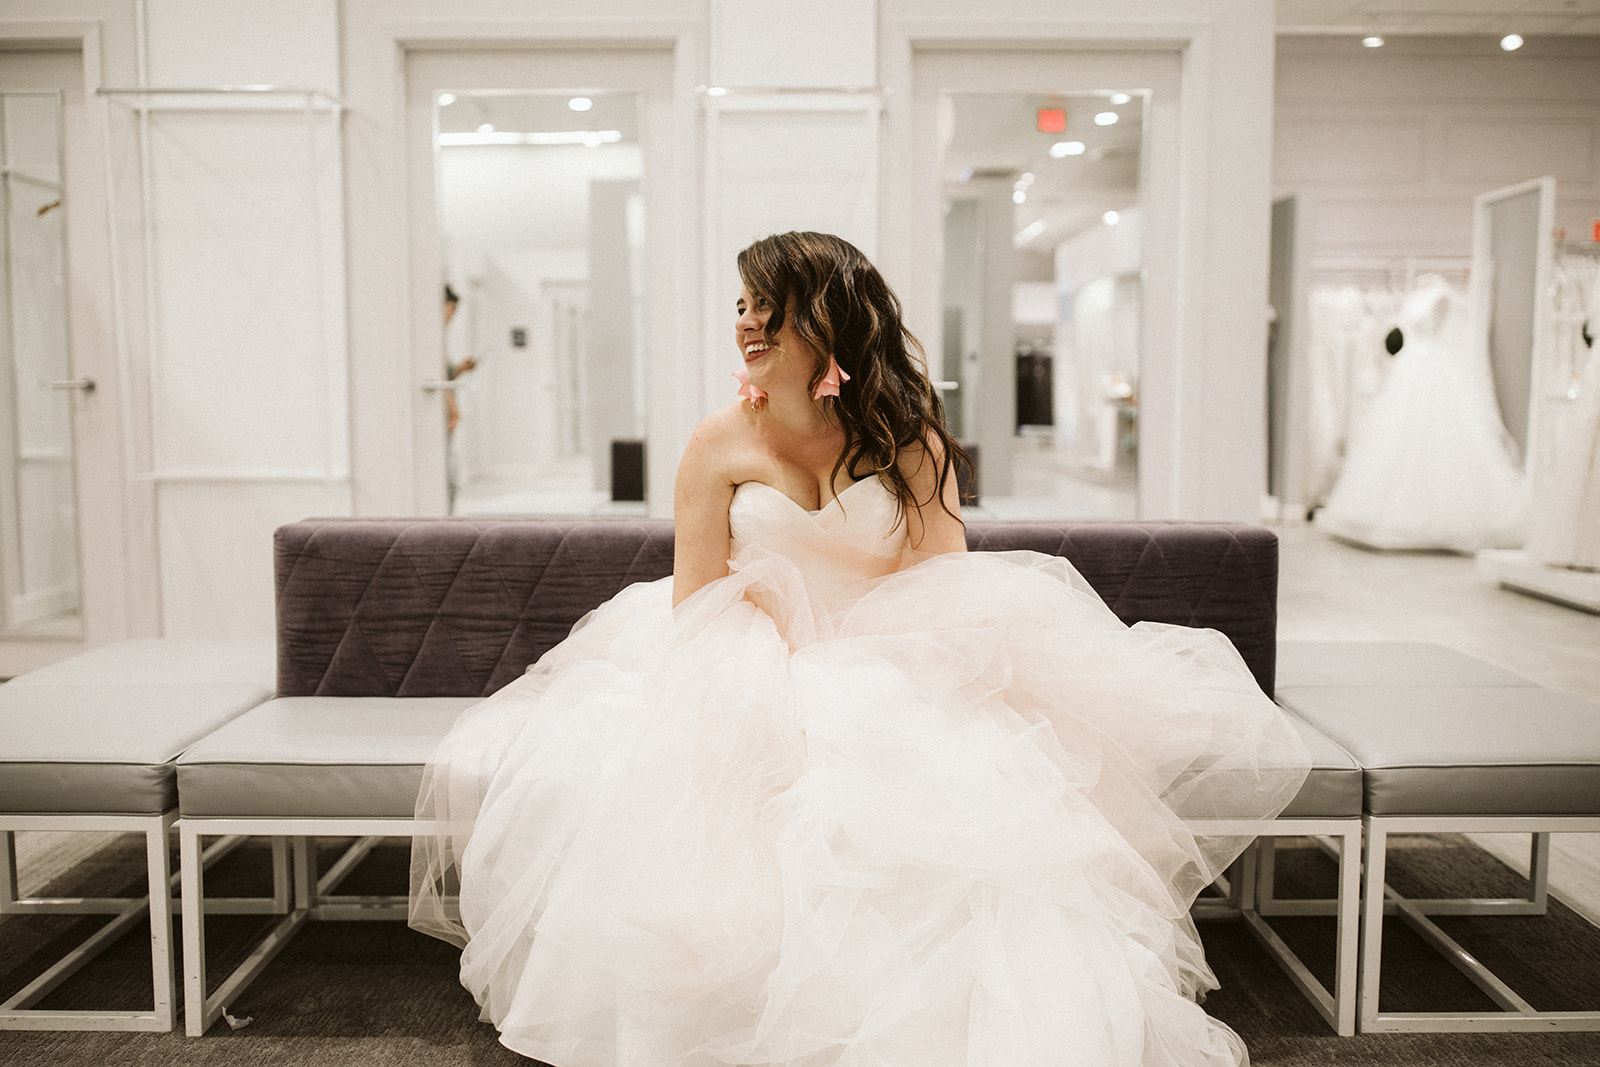 A woman with long dark hair sits in a blush tulle ball gown on a modern grey sofa in the brightly lit fitting room at David's Bridal